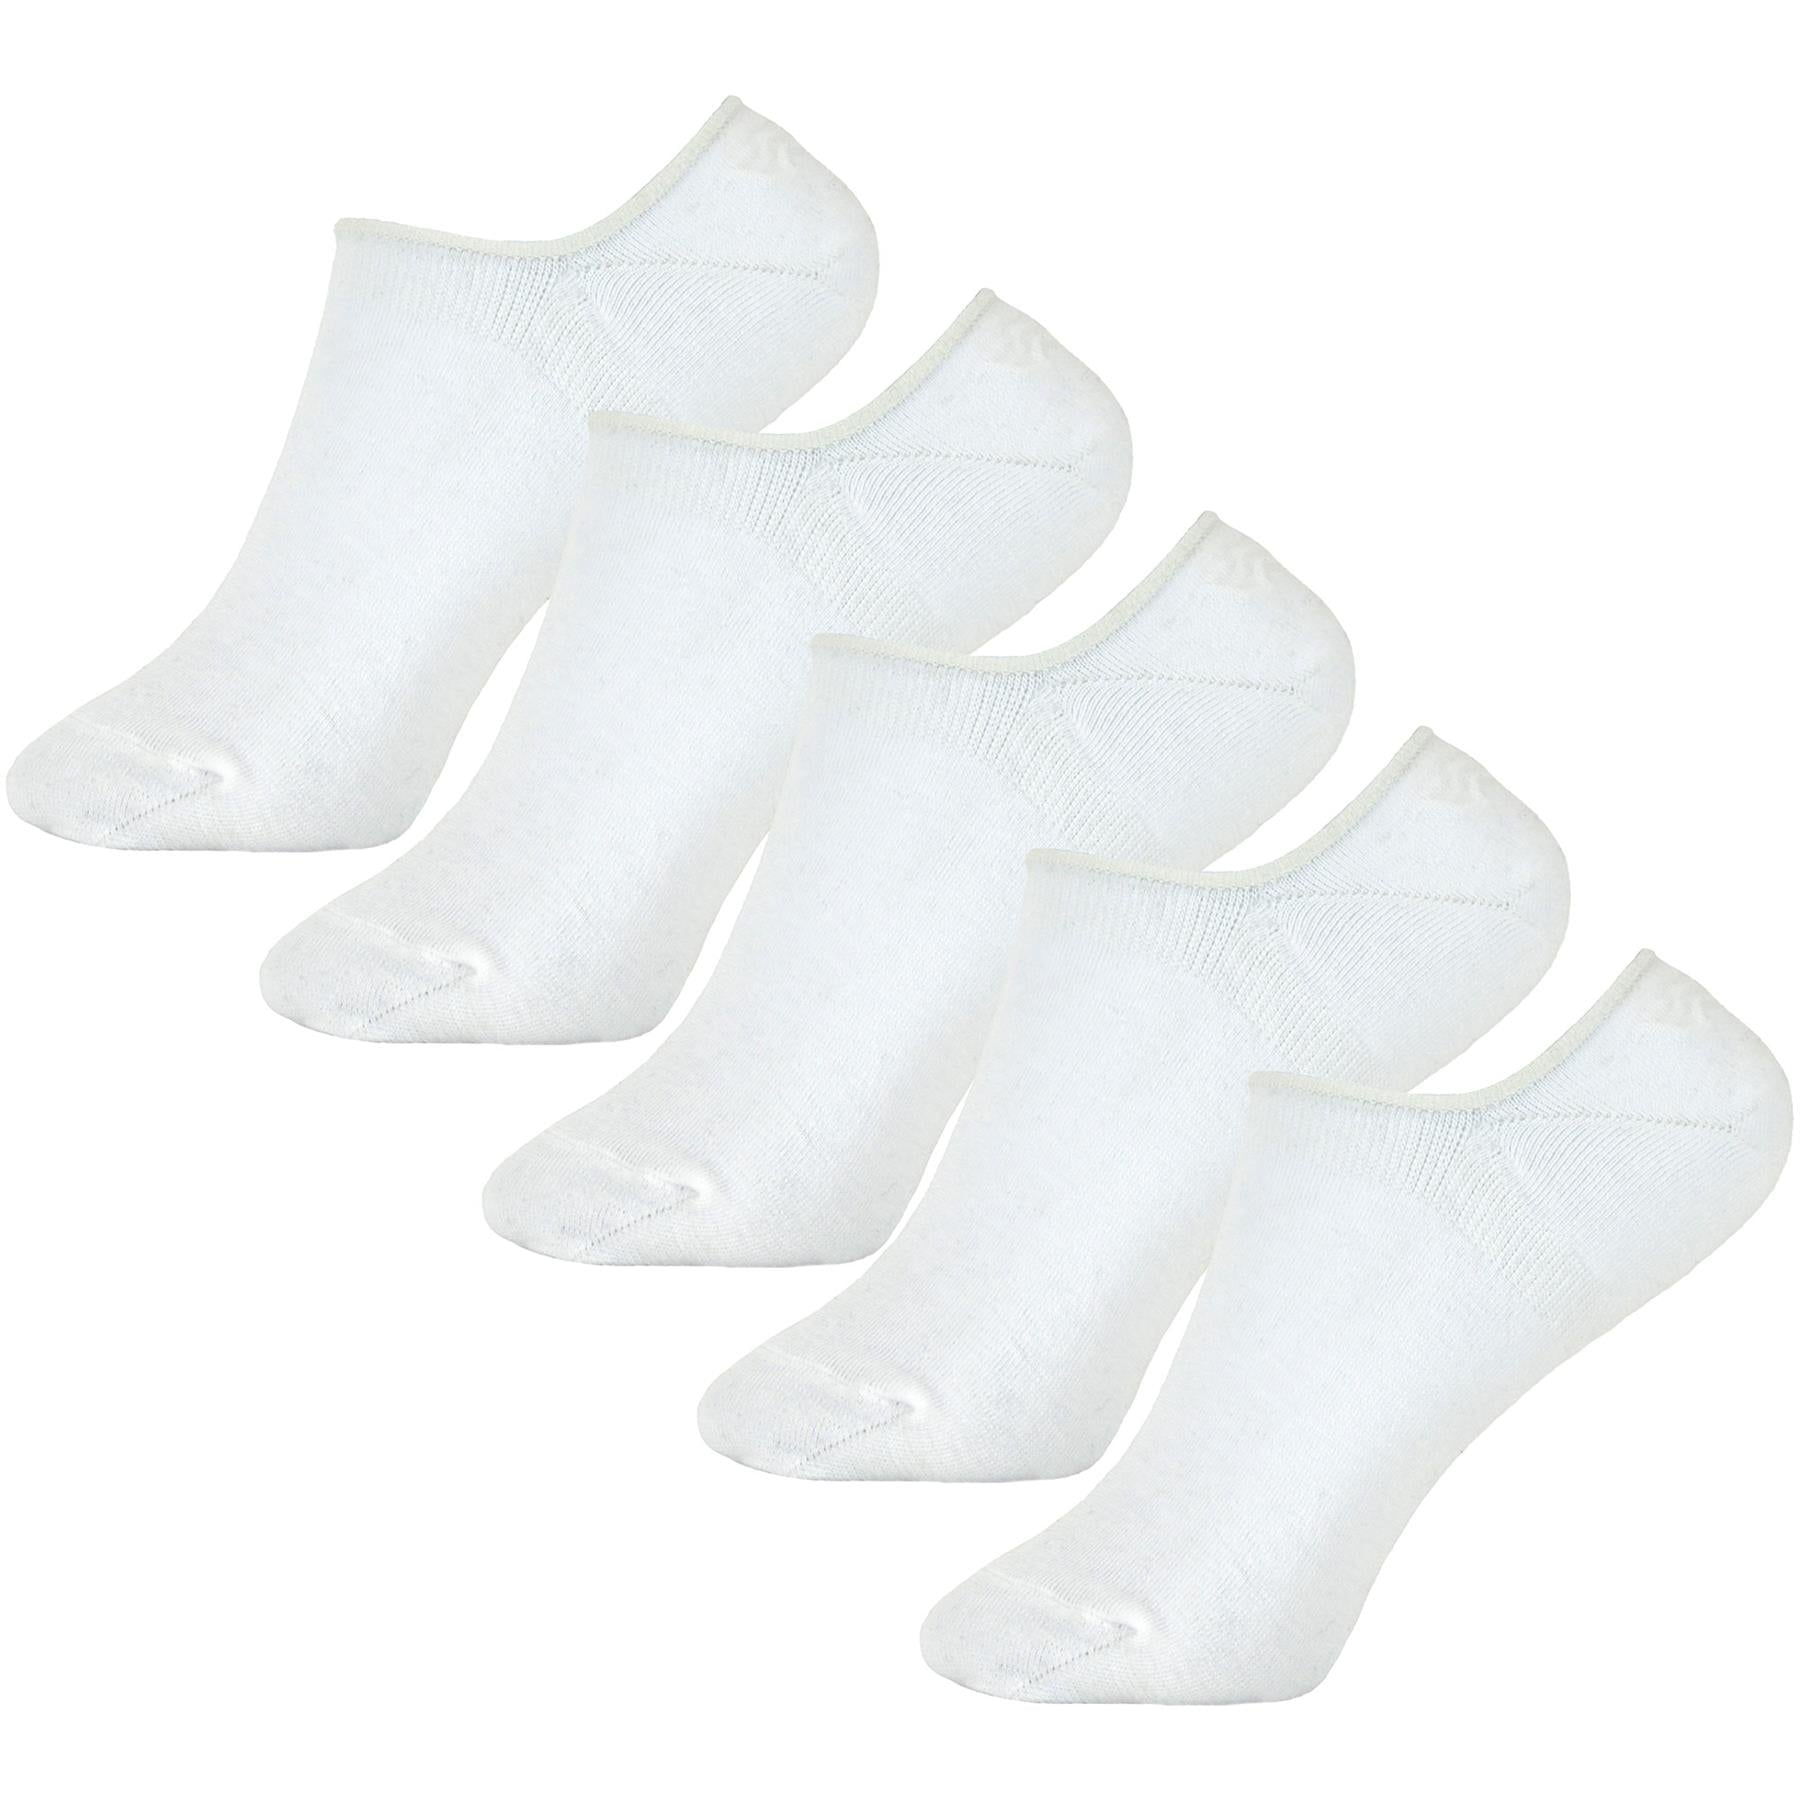 Girls Invisible Low Cut Liner Socks Pack of 5 Silicon Support Non Slip Socks